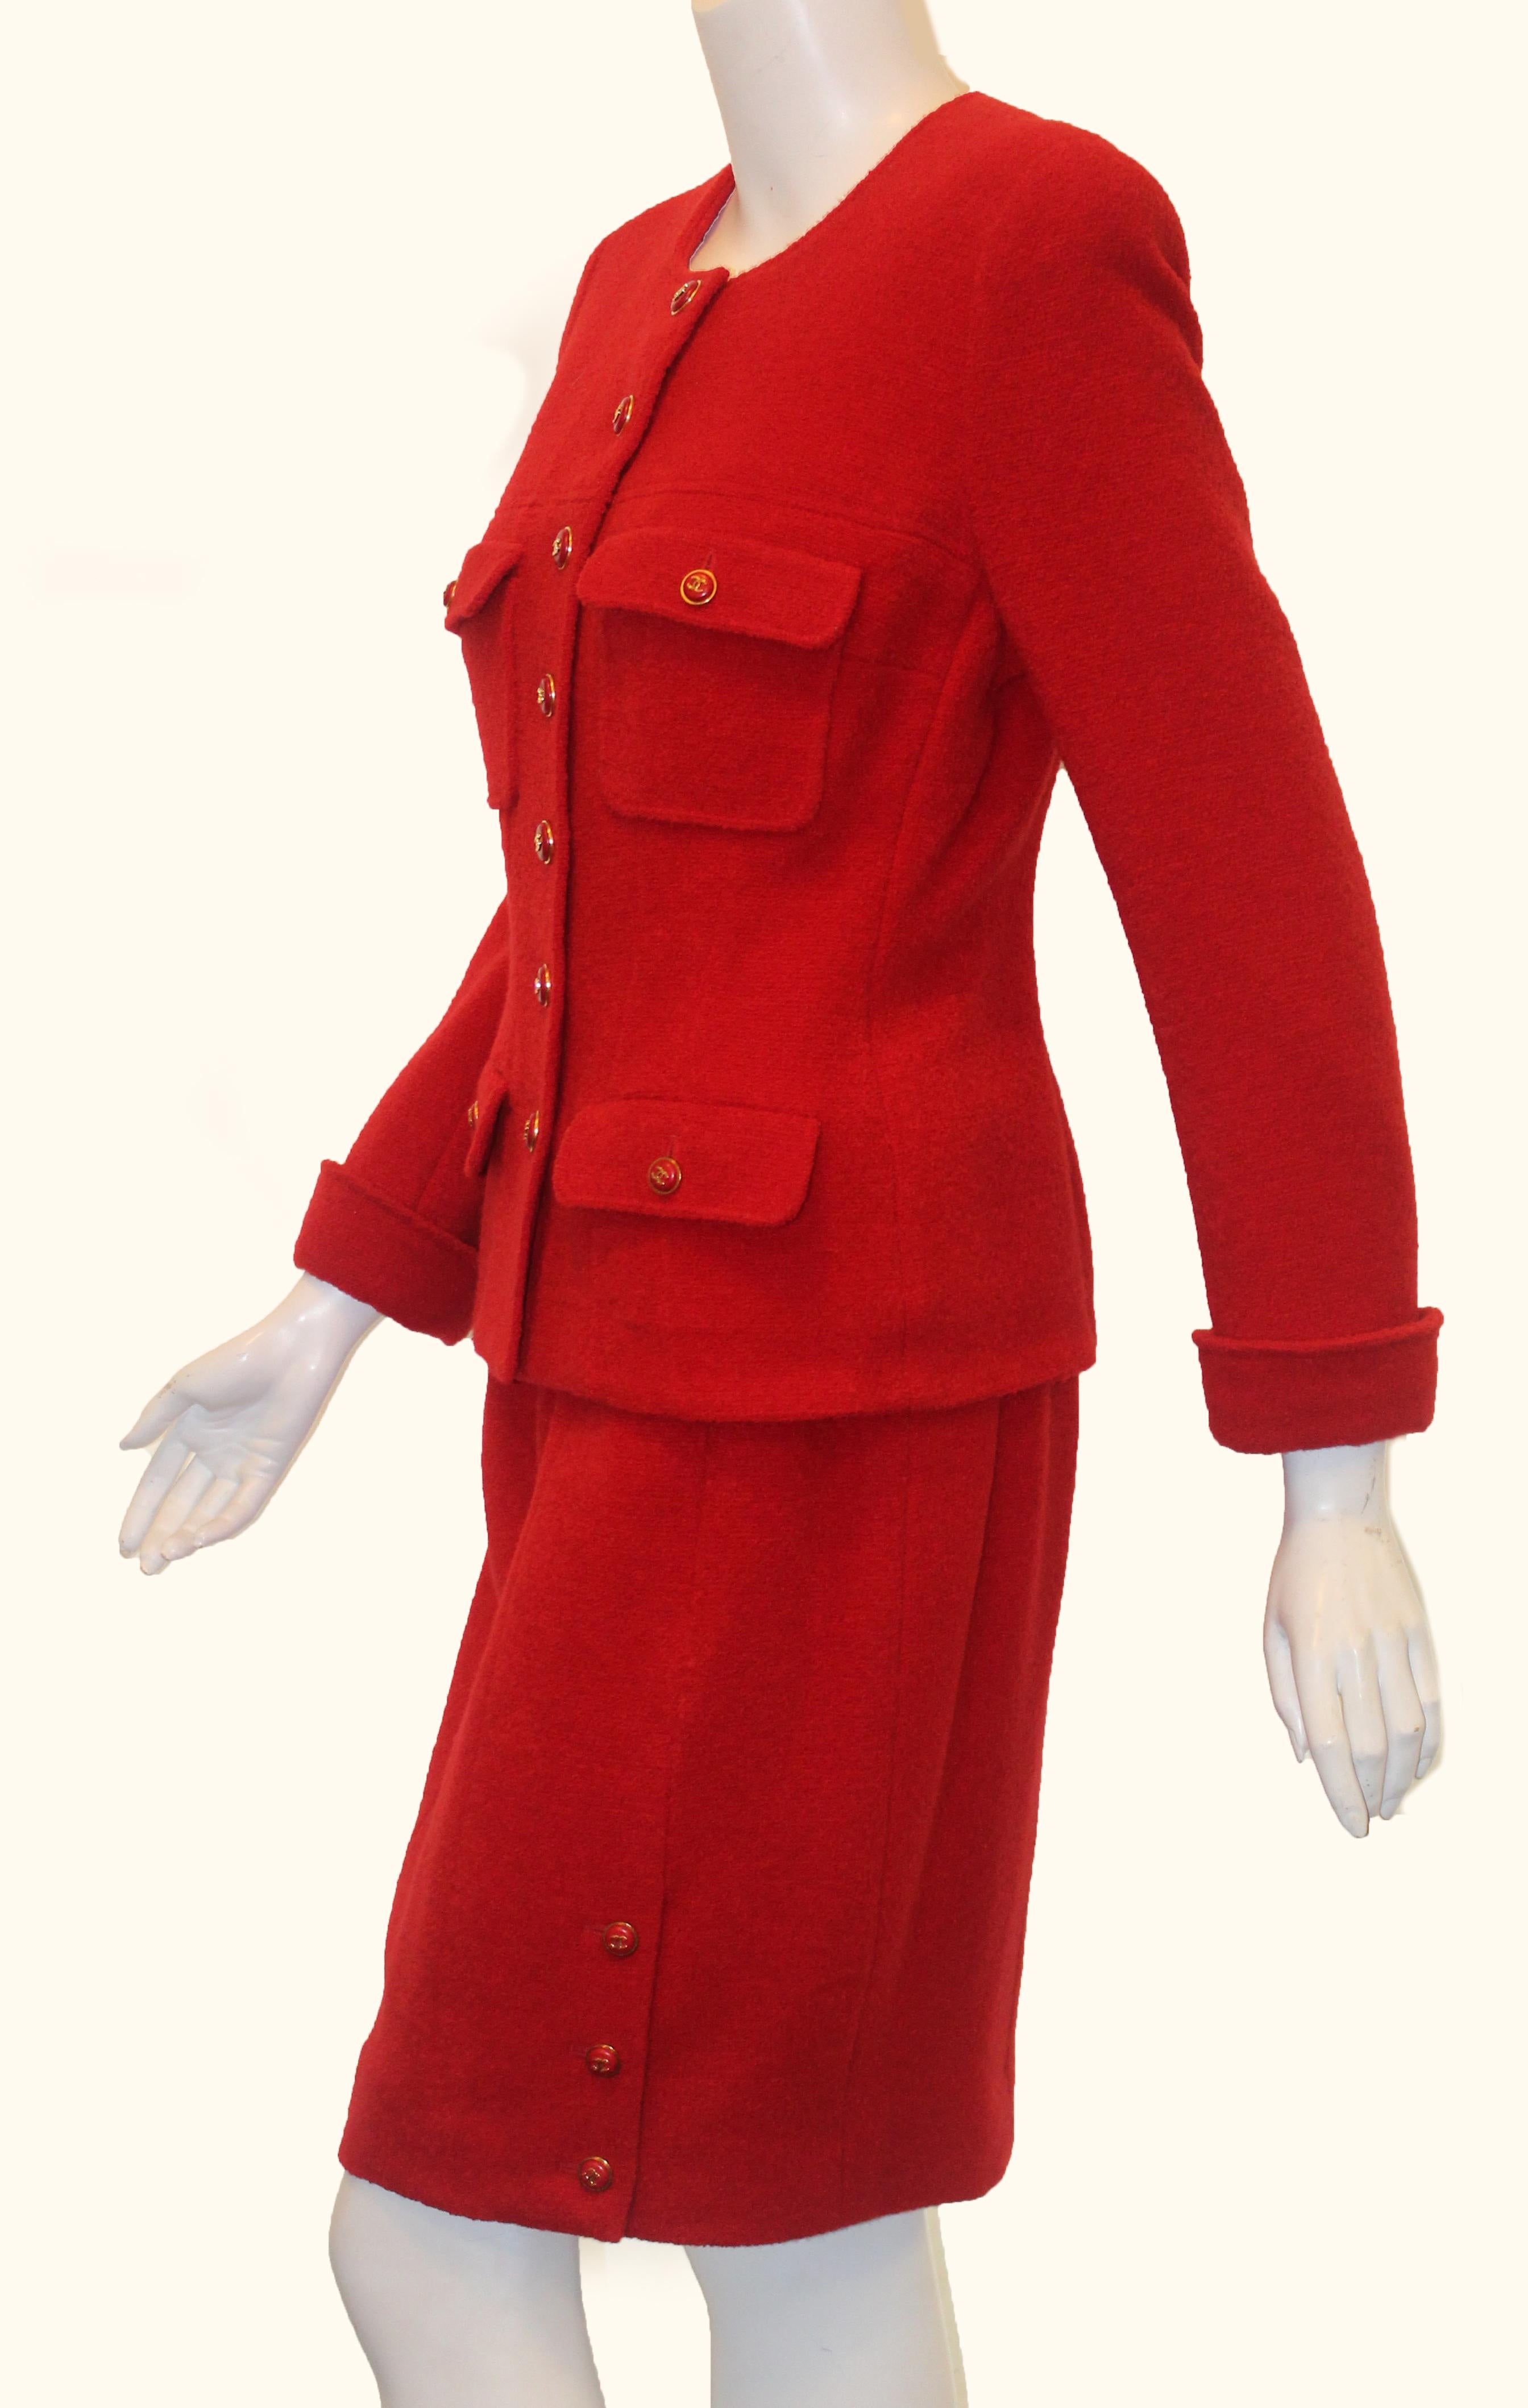 Chanel vibrant red wool and silk four flap pocket with seven CC red & gold tone buttons for closure.  This Chanel suit from the 1995 Fall Collection is in pristine condition, as if today was 1995 and you were shopping at Bergdorf Goodman.  This